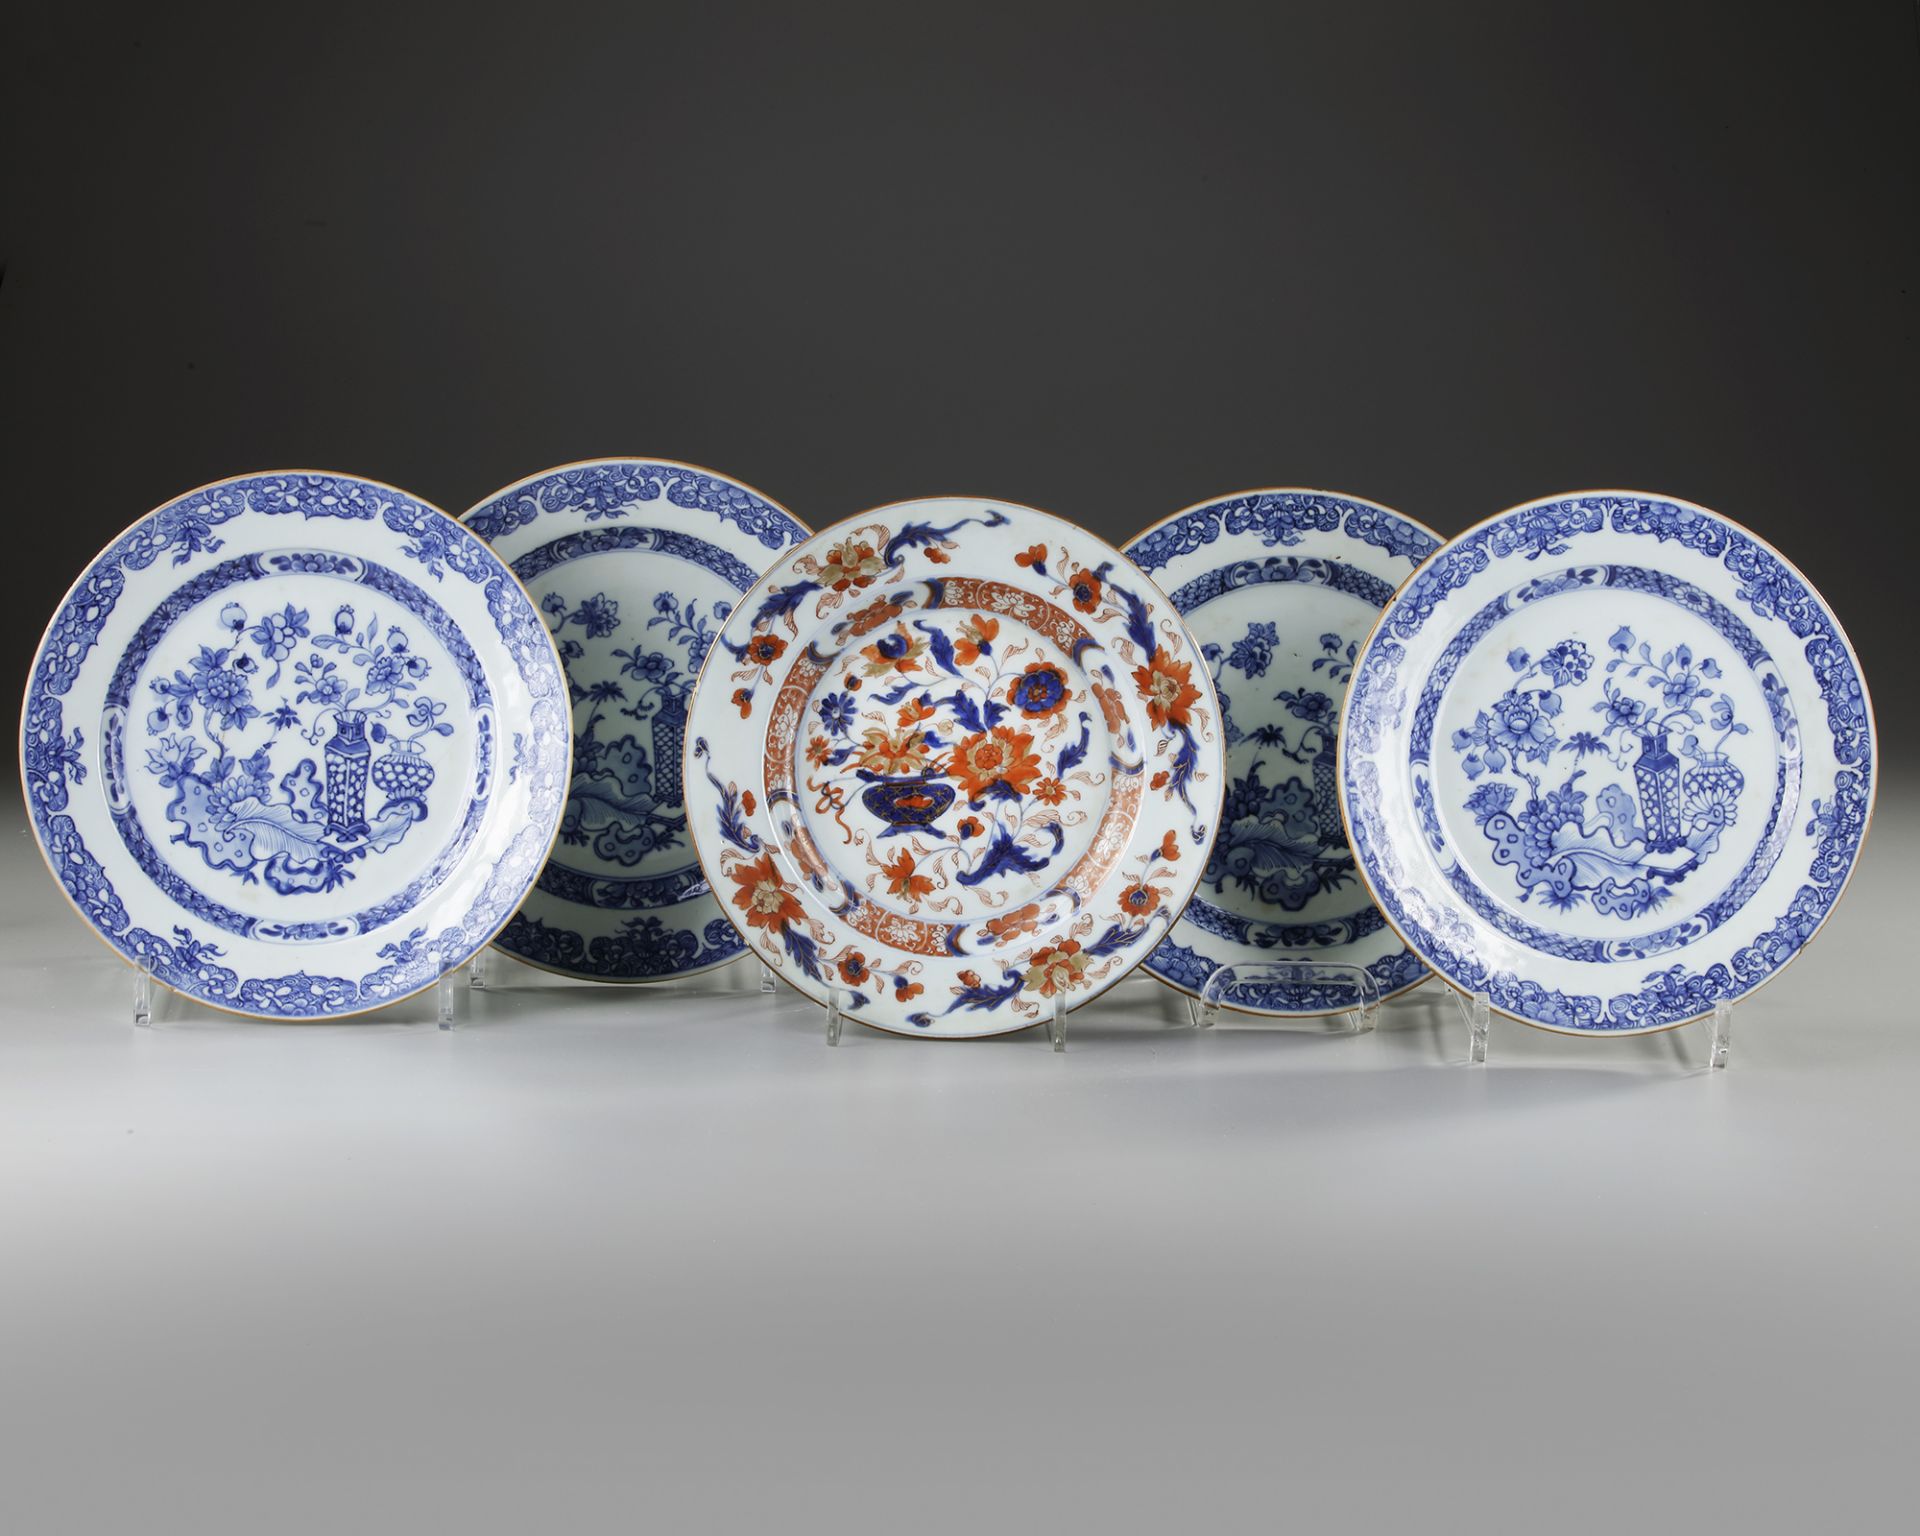 FIVE CHINESE PORCELAIN DISHES, 18TH CENTURY